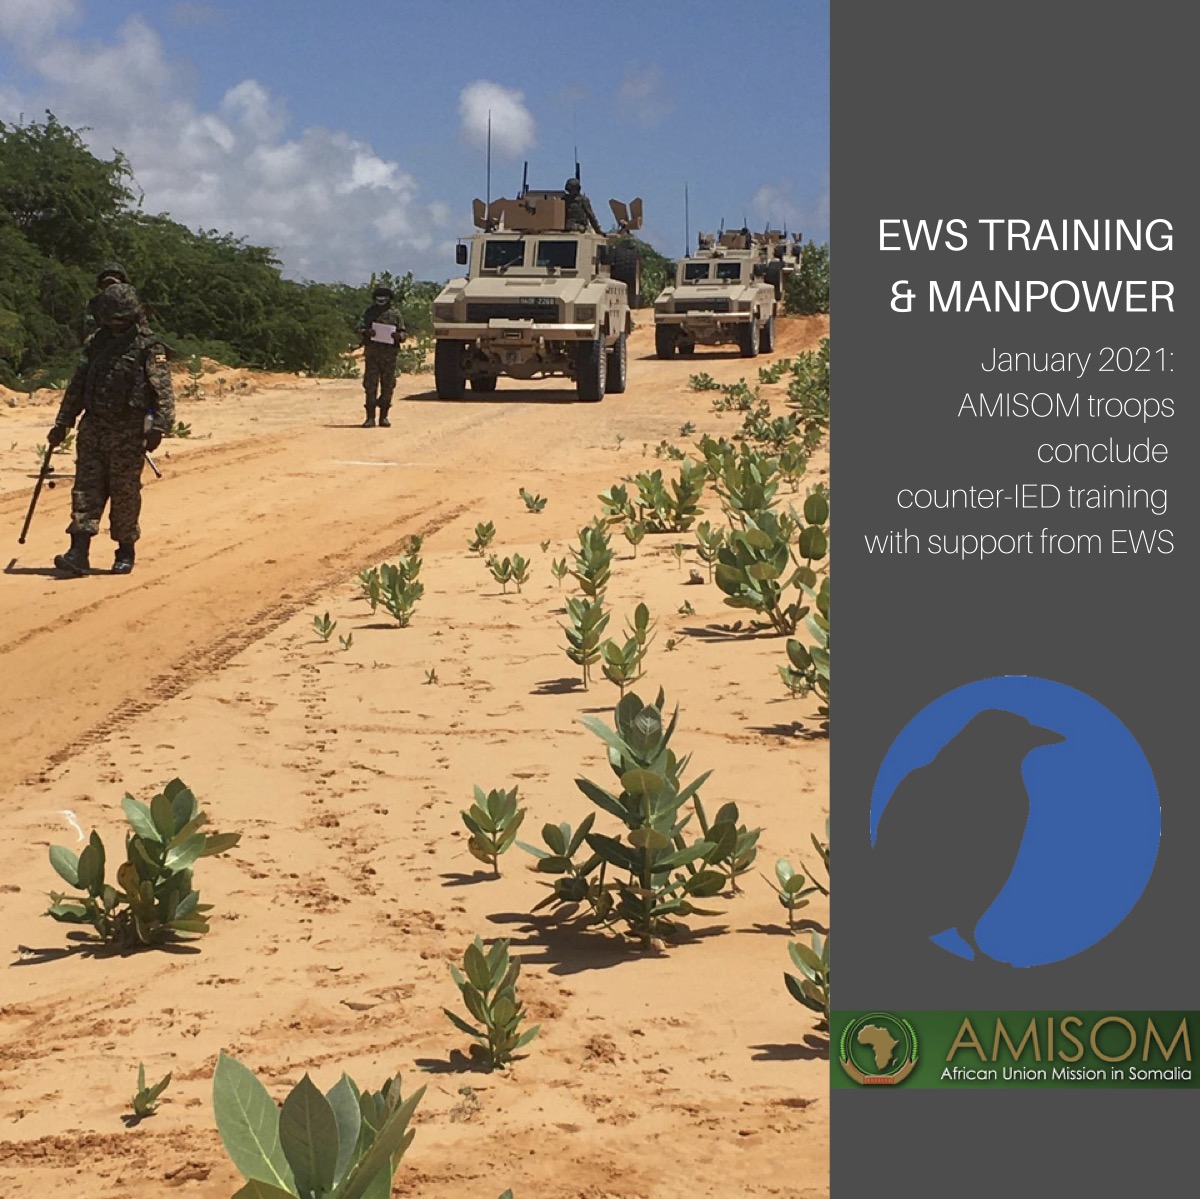 AMISOM troops conclude counter IED training with help from EWS